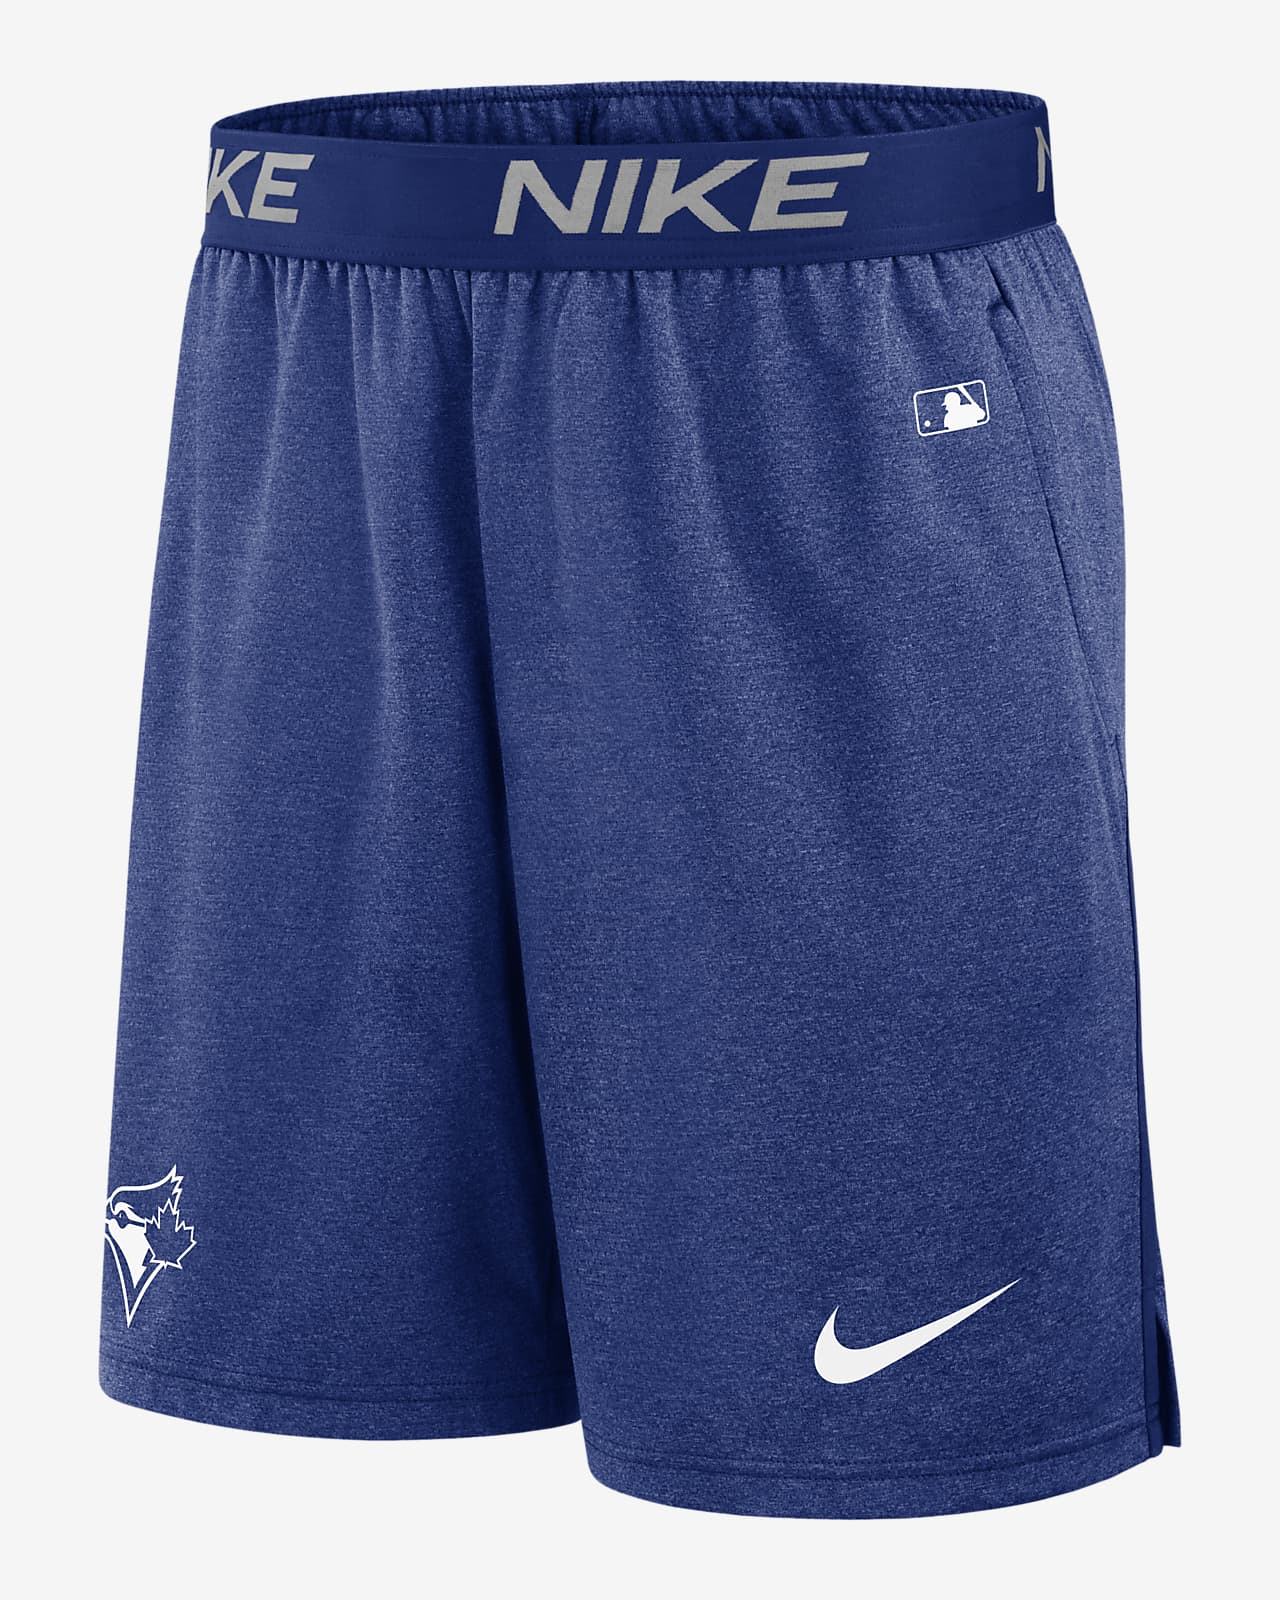 Toronto Blue Jays Authentic Collection Practice Men's Nike Dri-FIT MLB Shorts